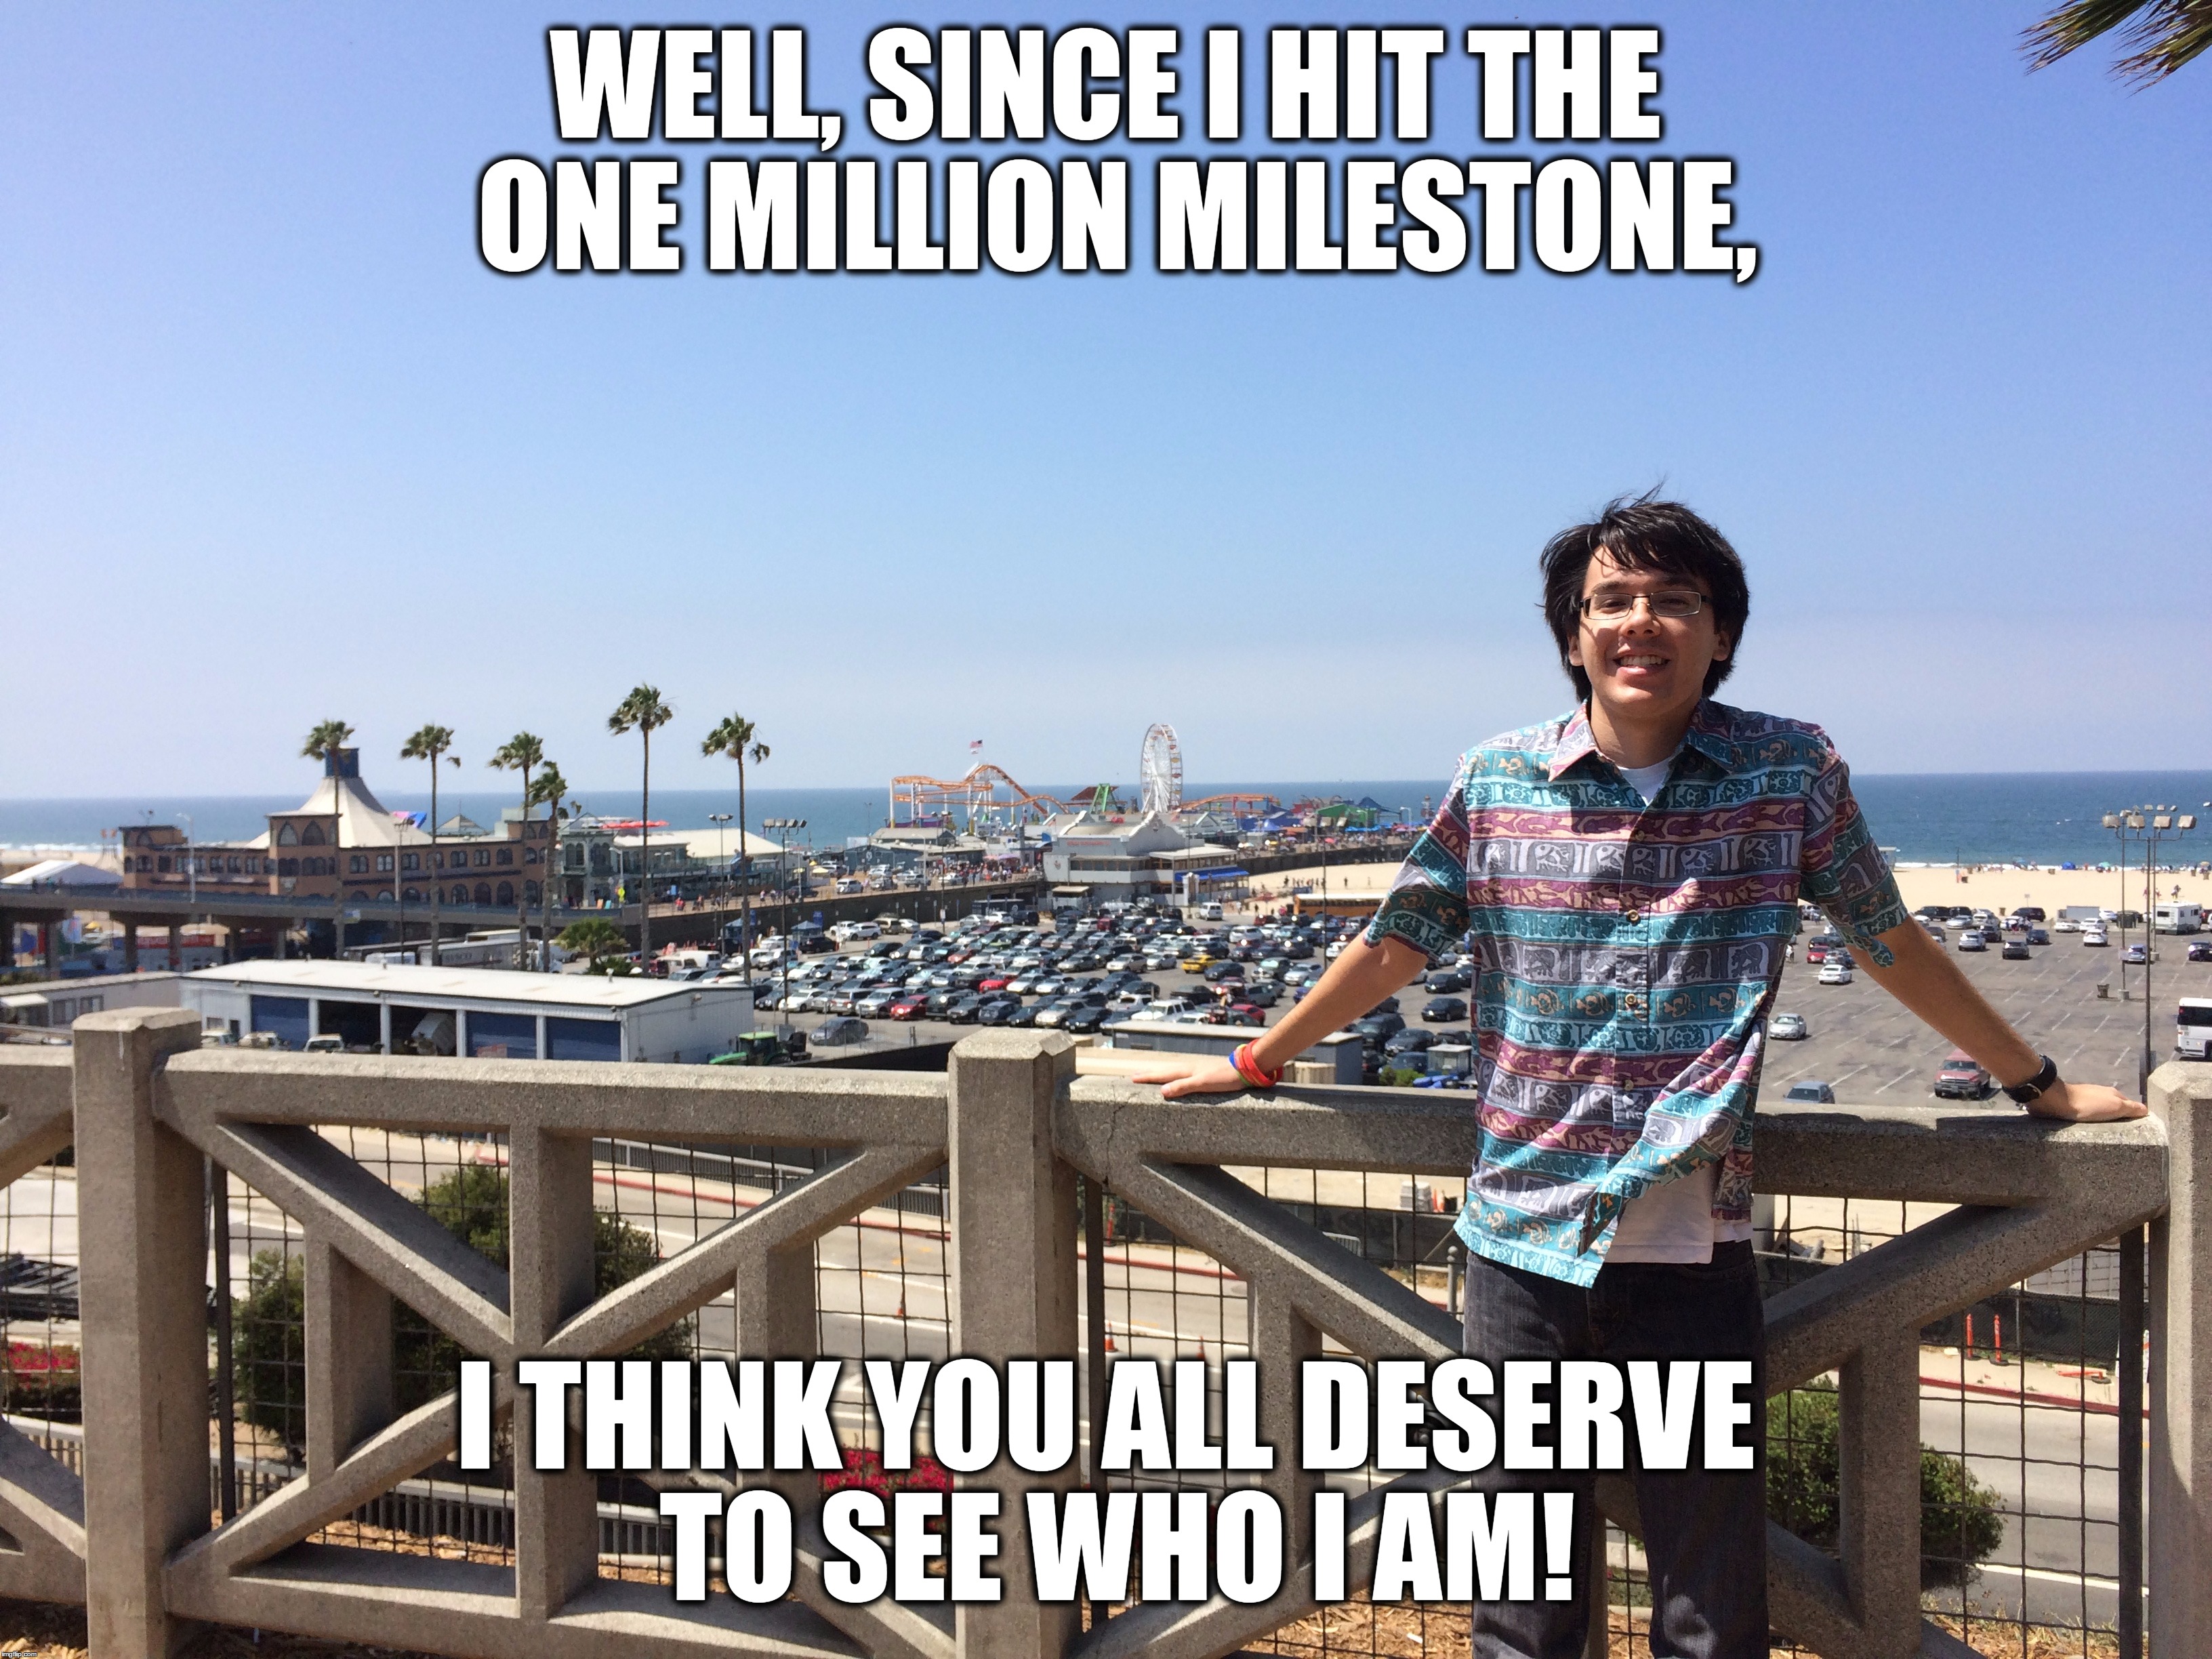 The Moment You All Been Waiting For!  | WELL, SINCE I HIT THE ONE MILLION MILESTONE, I THINK YOU ALL DESERVE TO SEE WHO I AM! | image tagged in memes,juicydeath1025,santa monica,beach,one million points,thank you | made w/ Imgflip meme maker